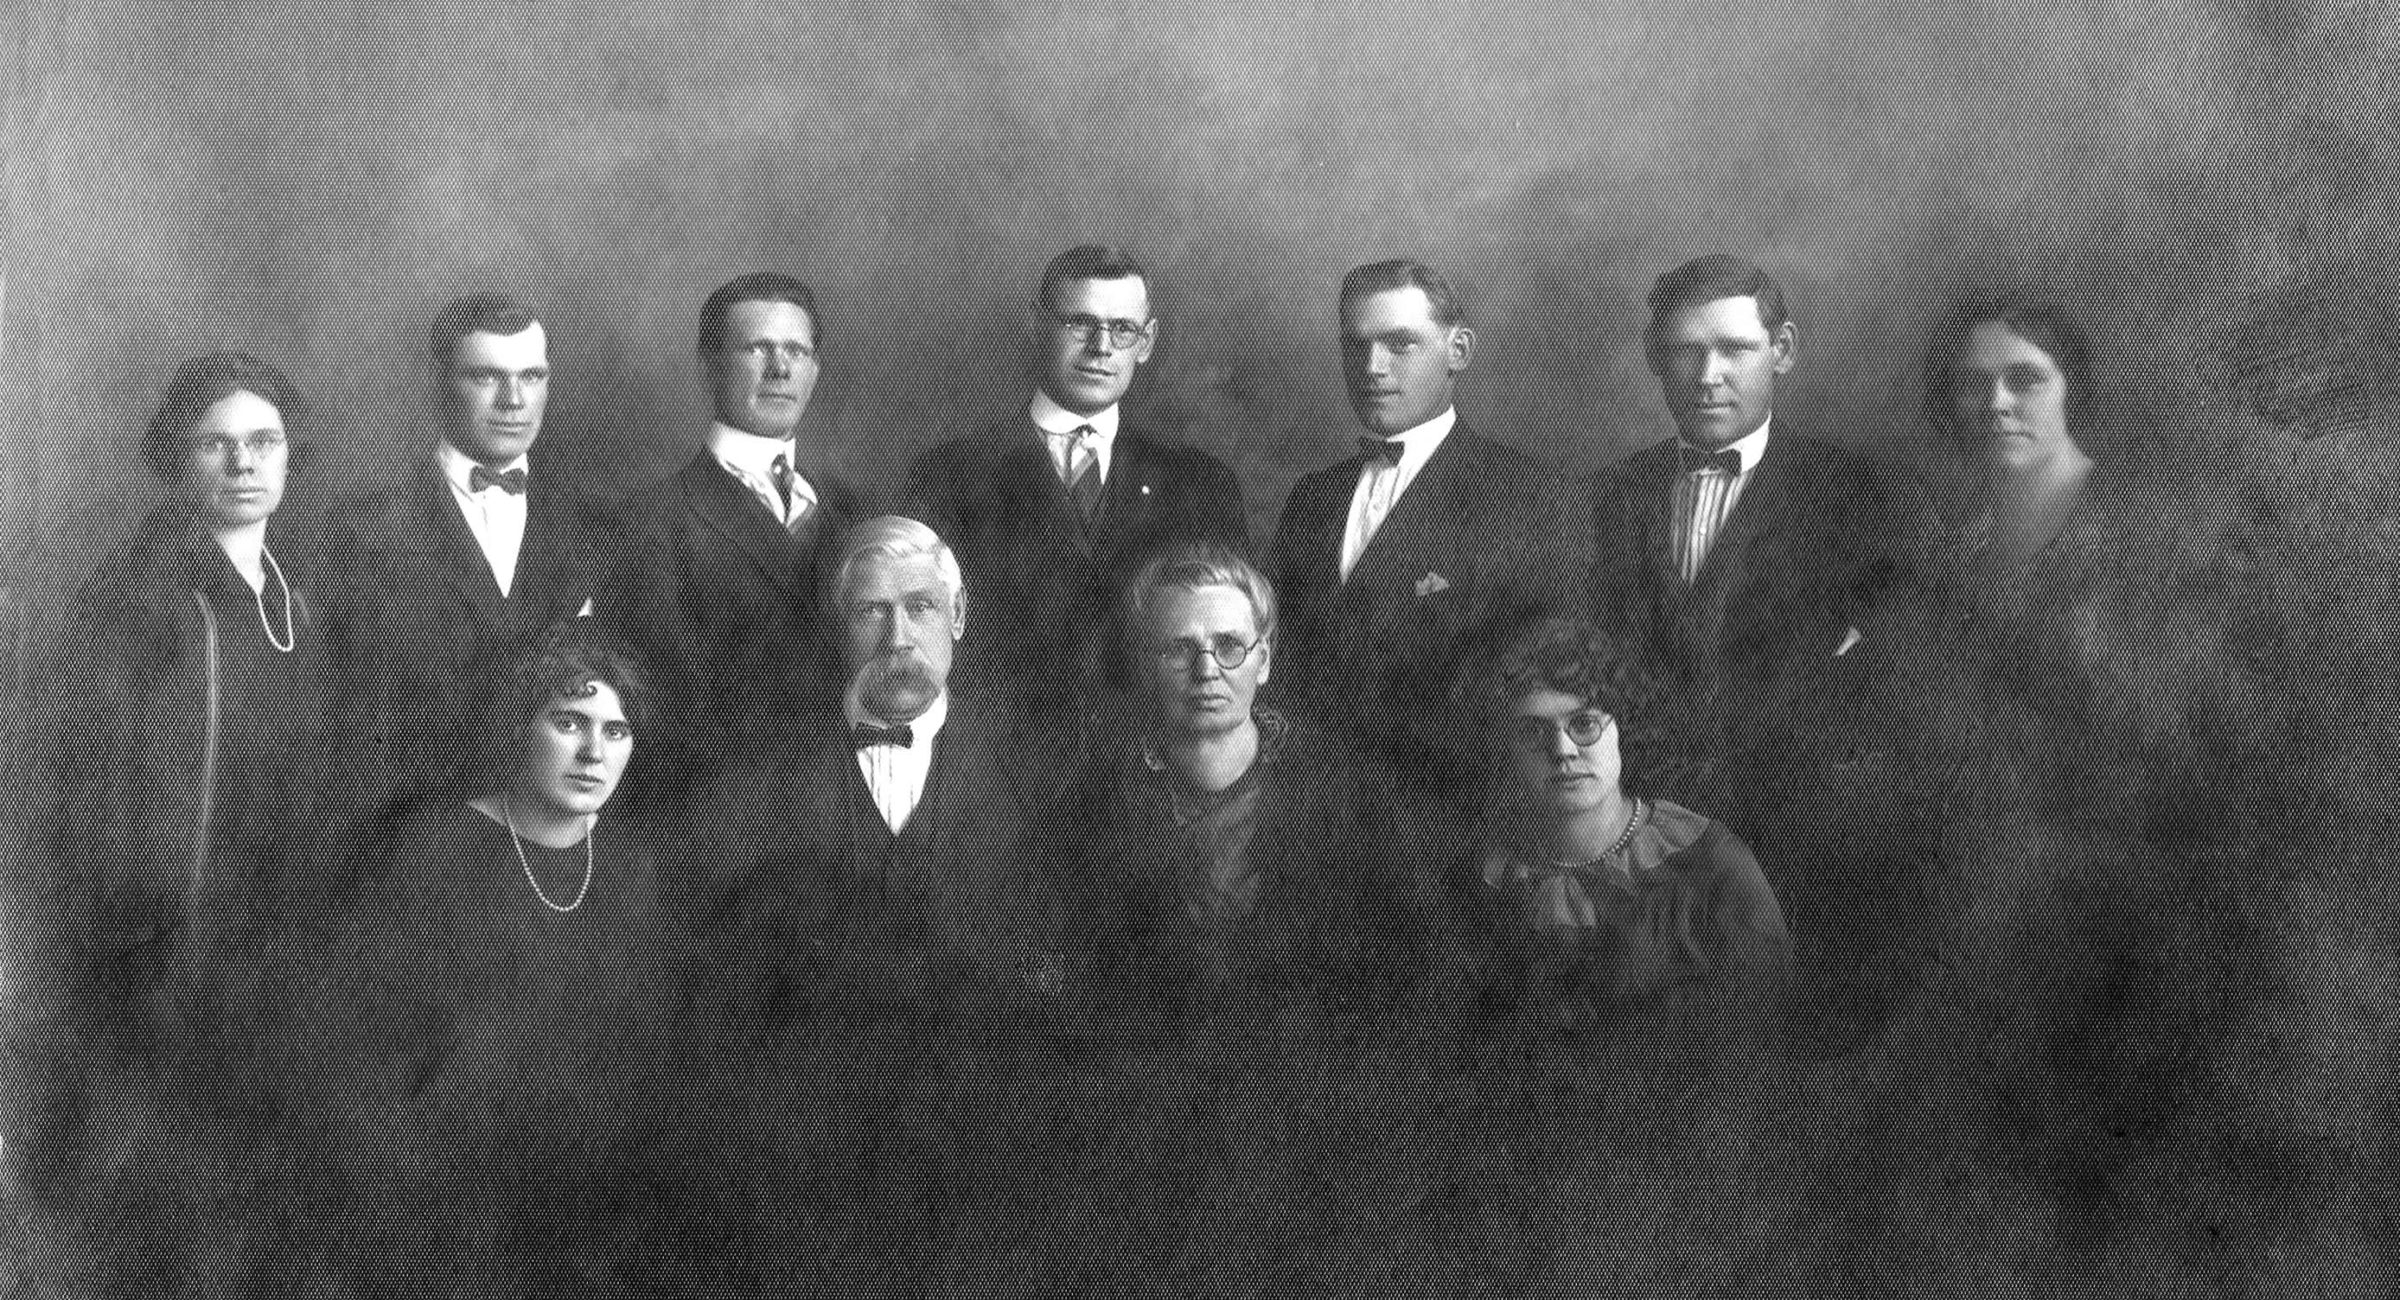 Jacob and Franciszka Pellowski with their family, ca. 1930.  Laura is at upper right.